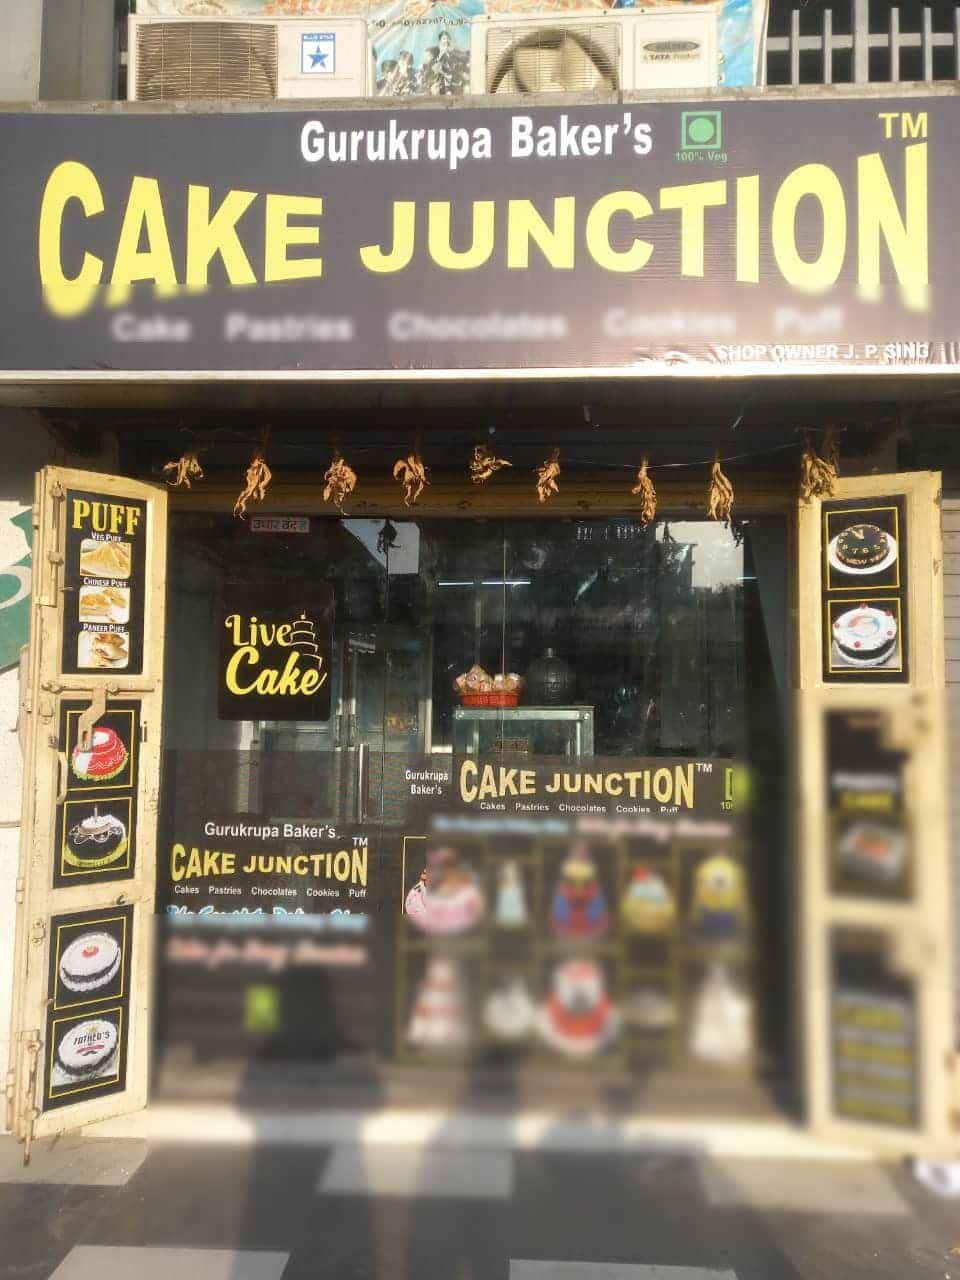 The Cake Junction added a new photo. - The Cake Junction